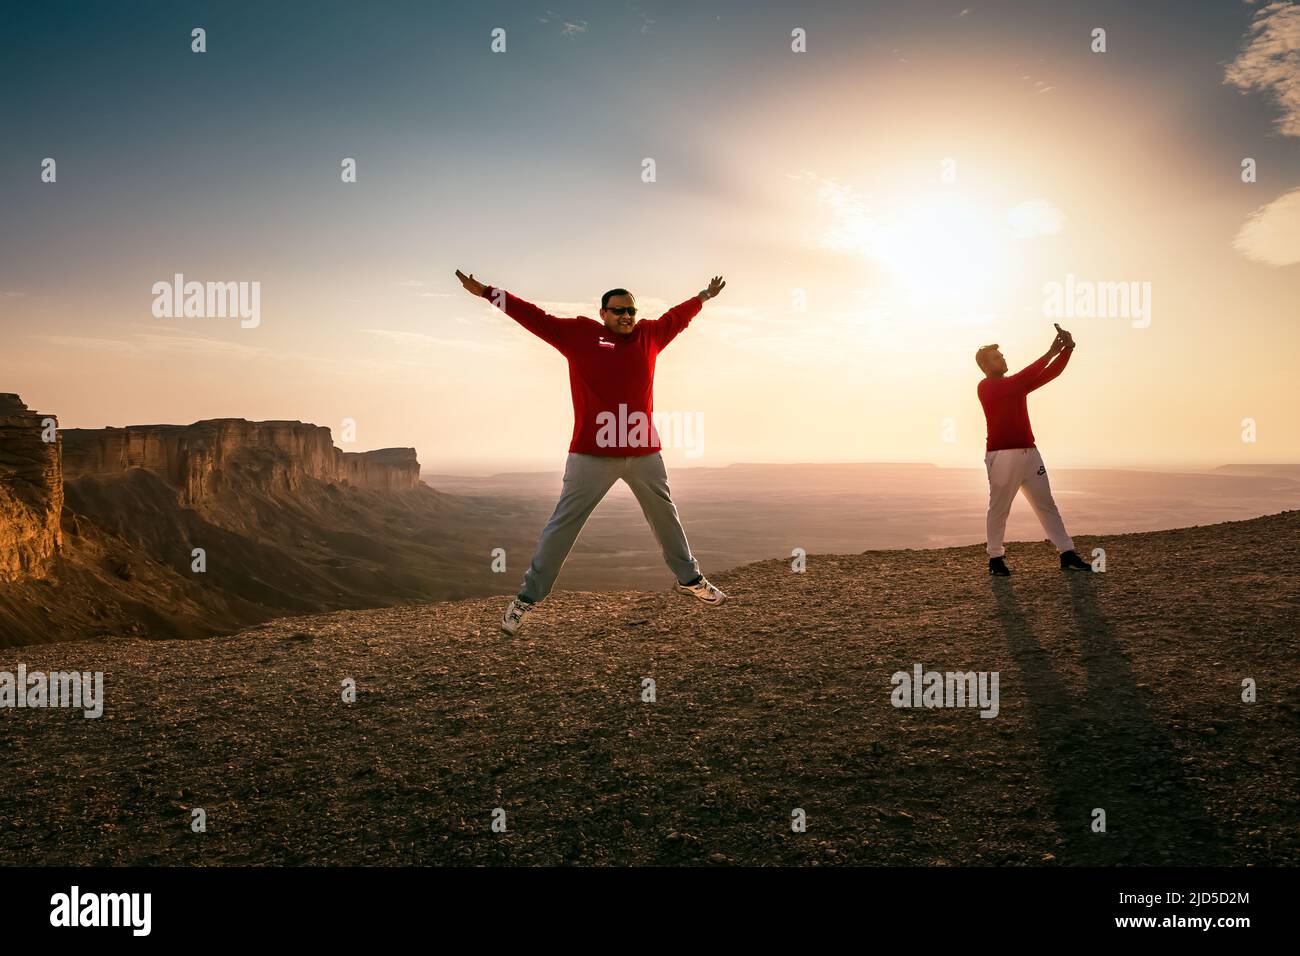 Happy Man jumping silhoutte poses with beautiful sunset background in Edge of the world Riyadh Saudi Arabia. Stock Photo